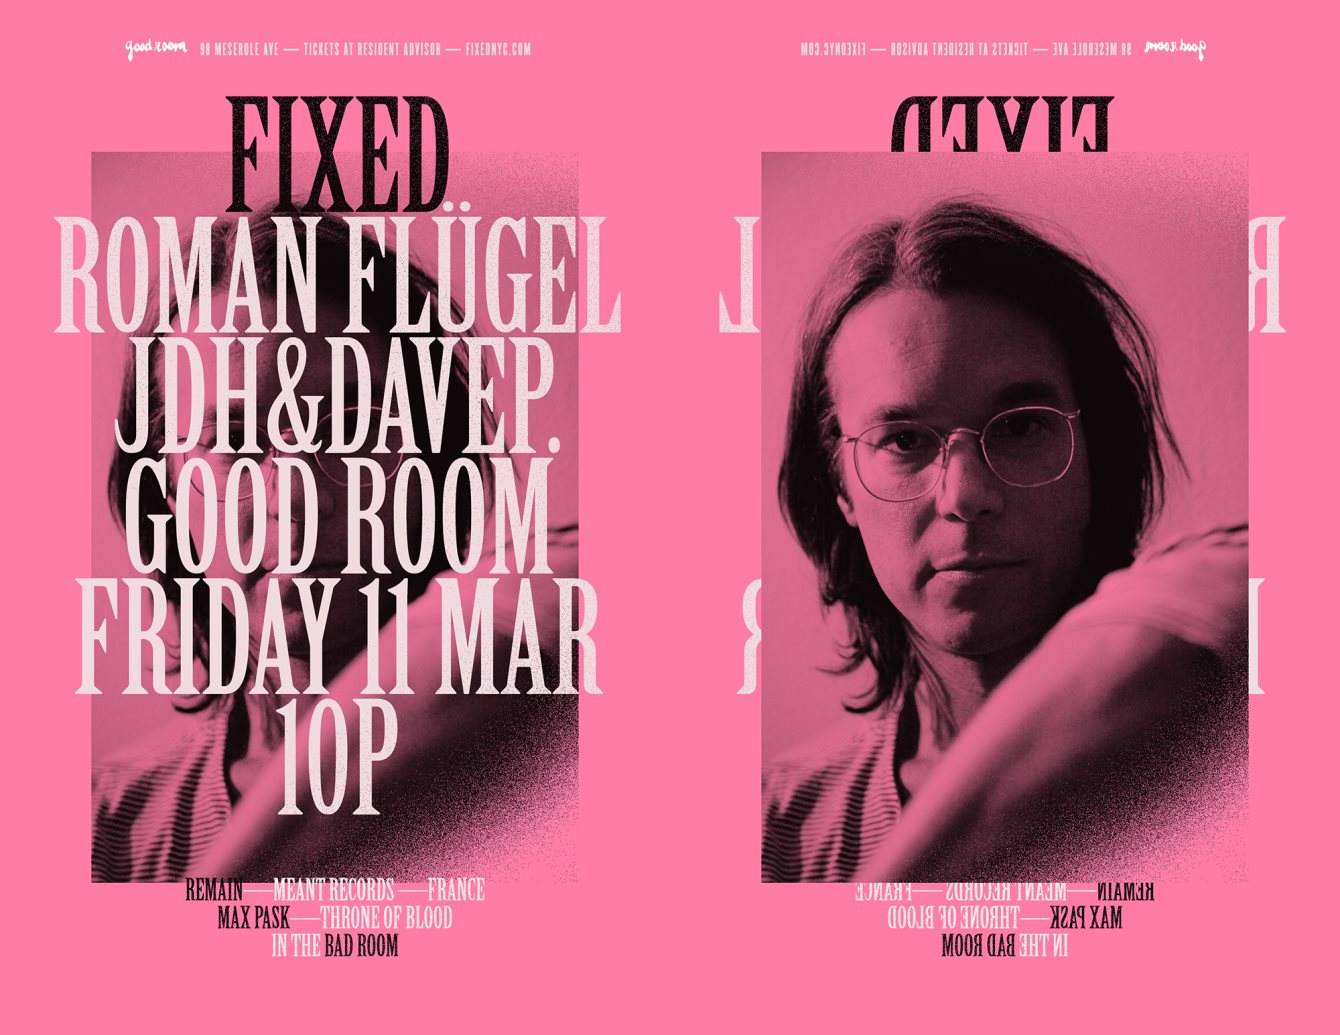 Fixed with Roman Flügel + Remain & Max Pask in the Bad Room - Página frontal